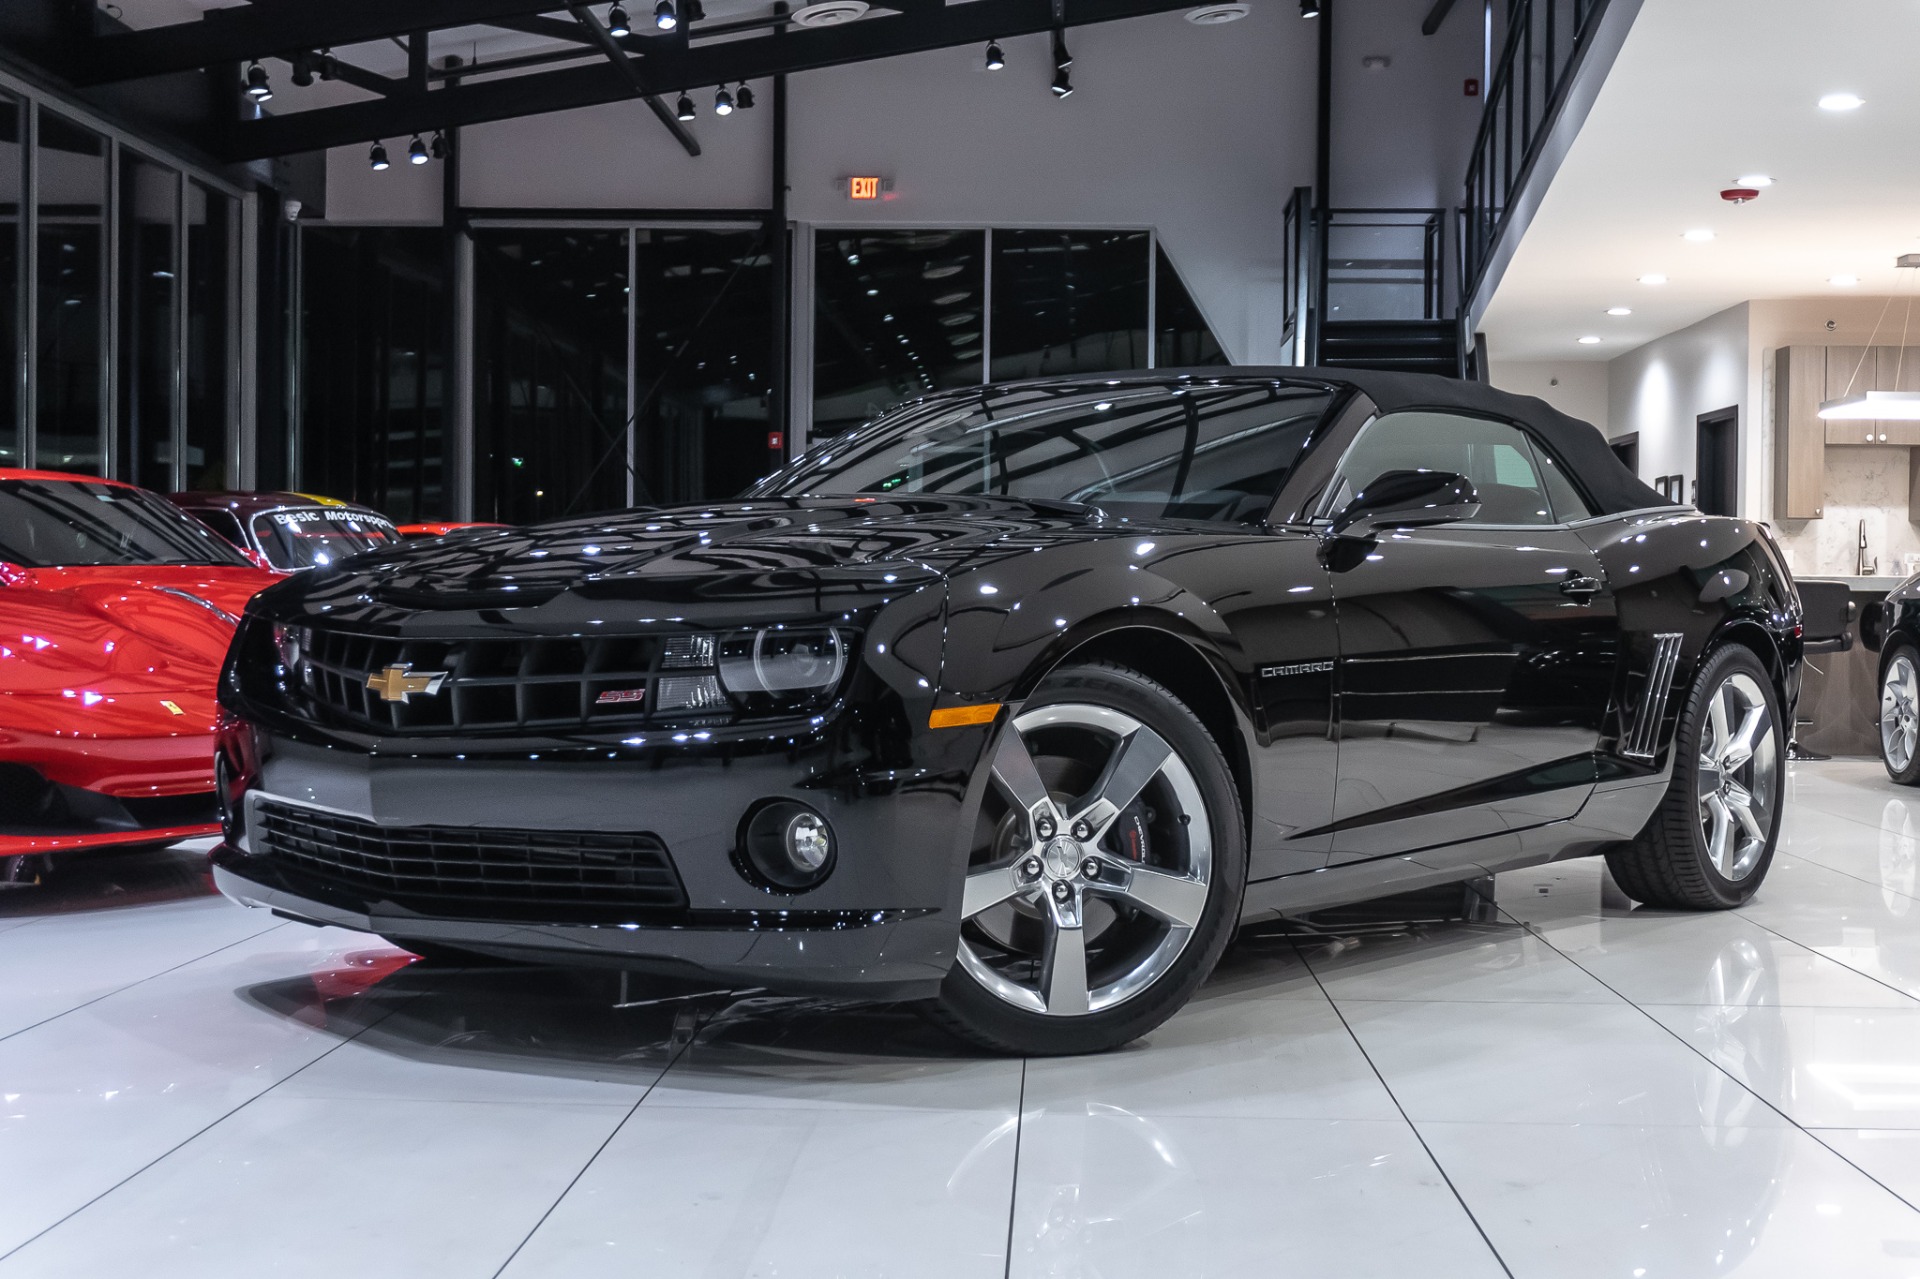 Used-2013-Chevrolet-Camaro-SS-Convertible-BACK-UP-CAMERA-ONLY-2K-MILES-PRISTINE-CONDITION